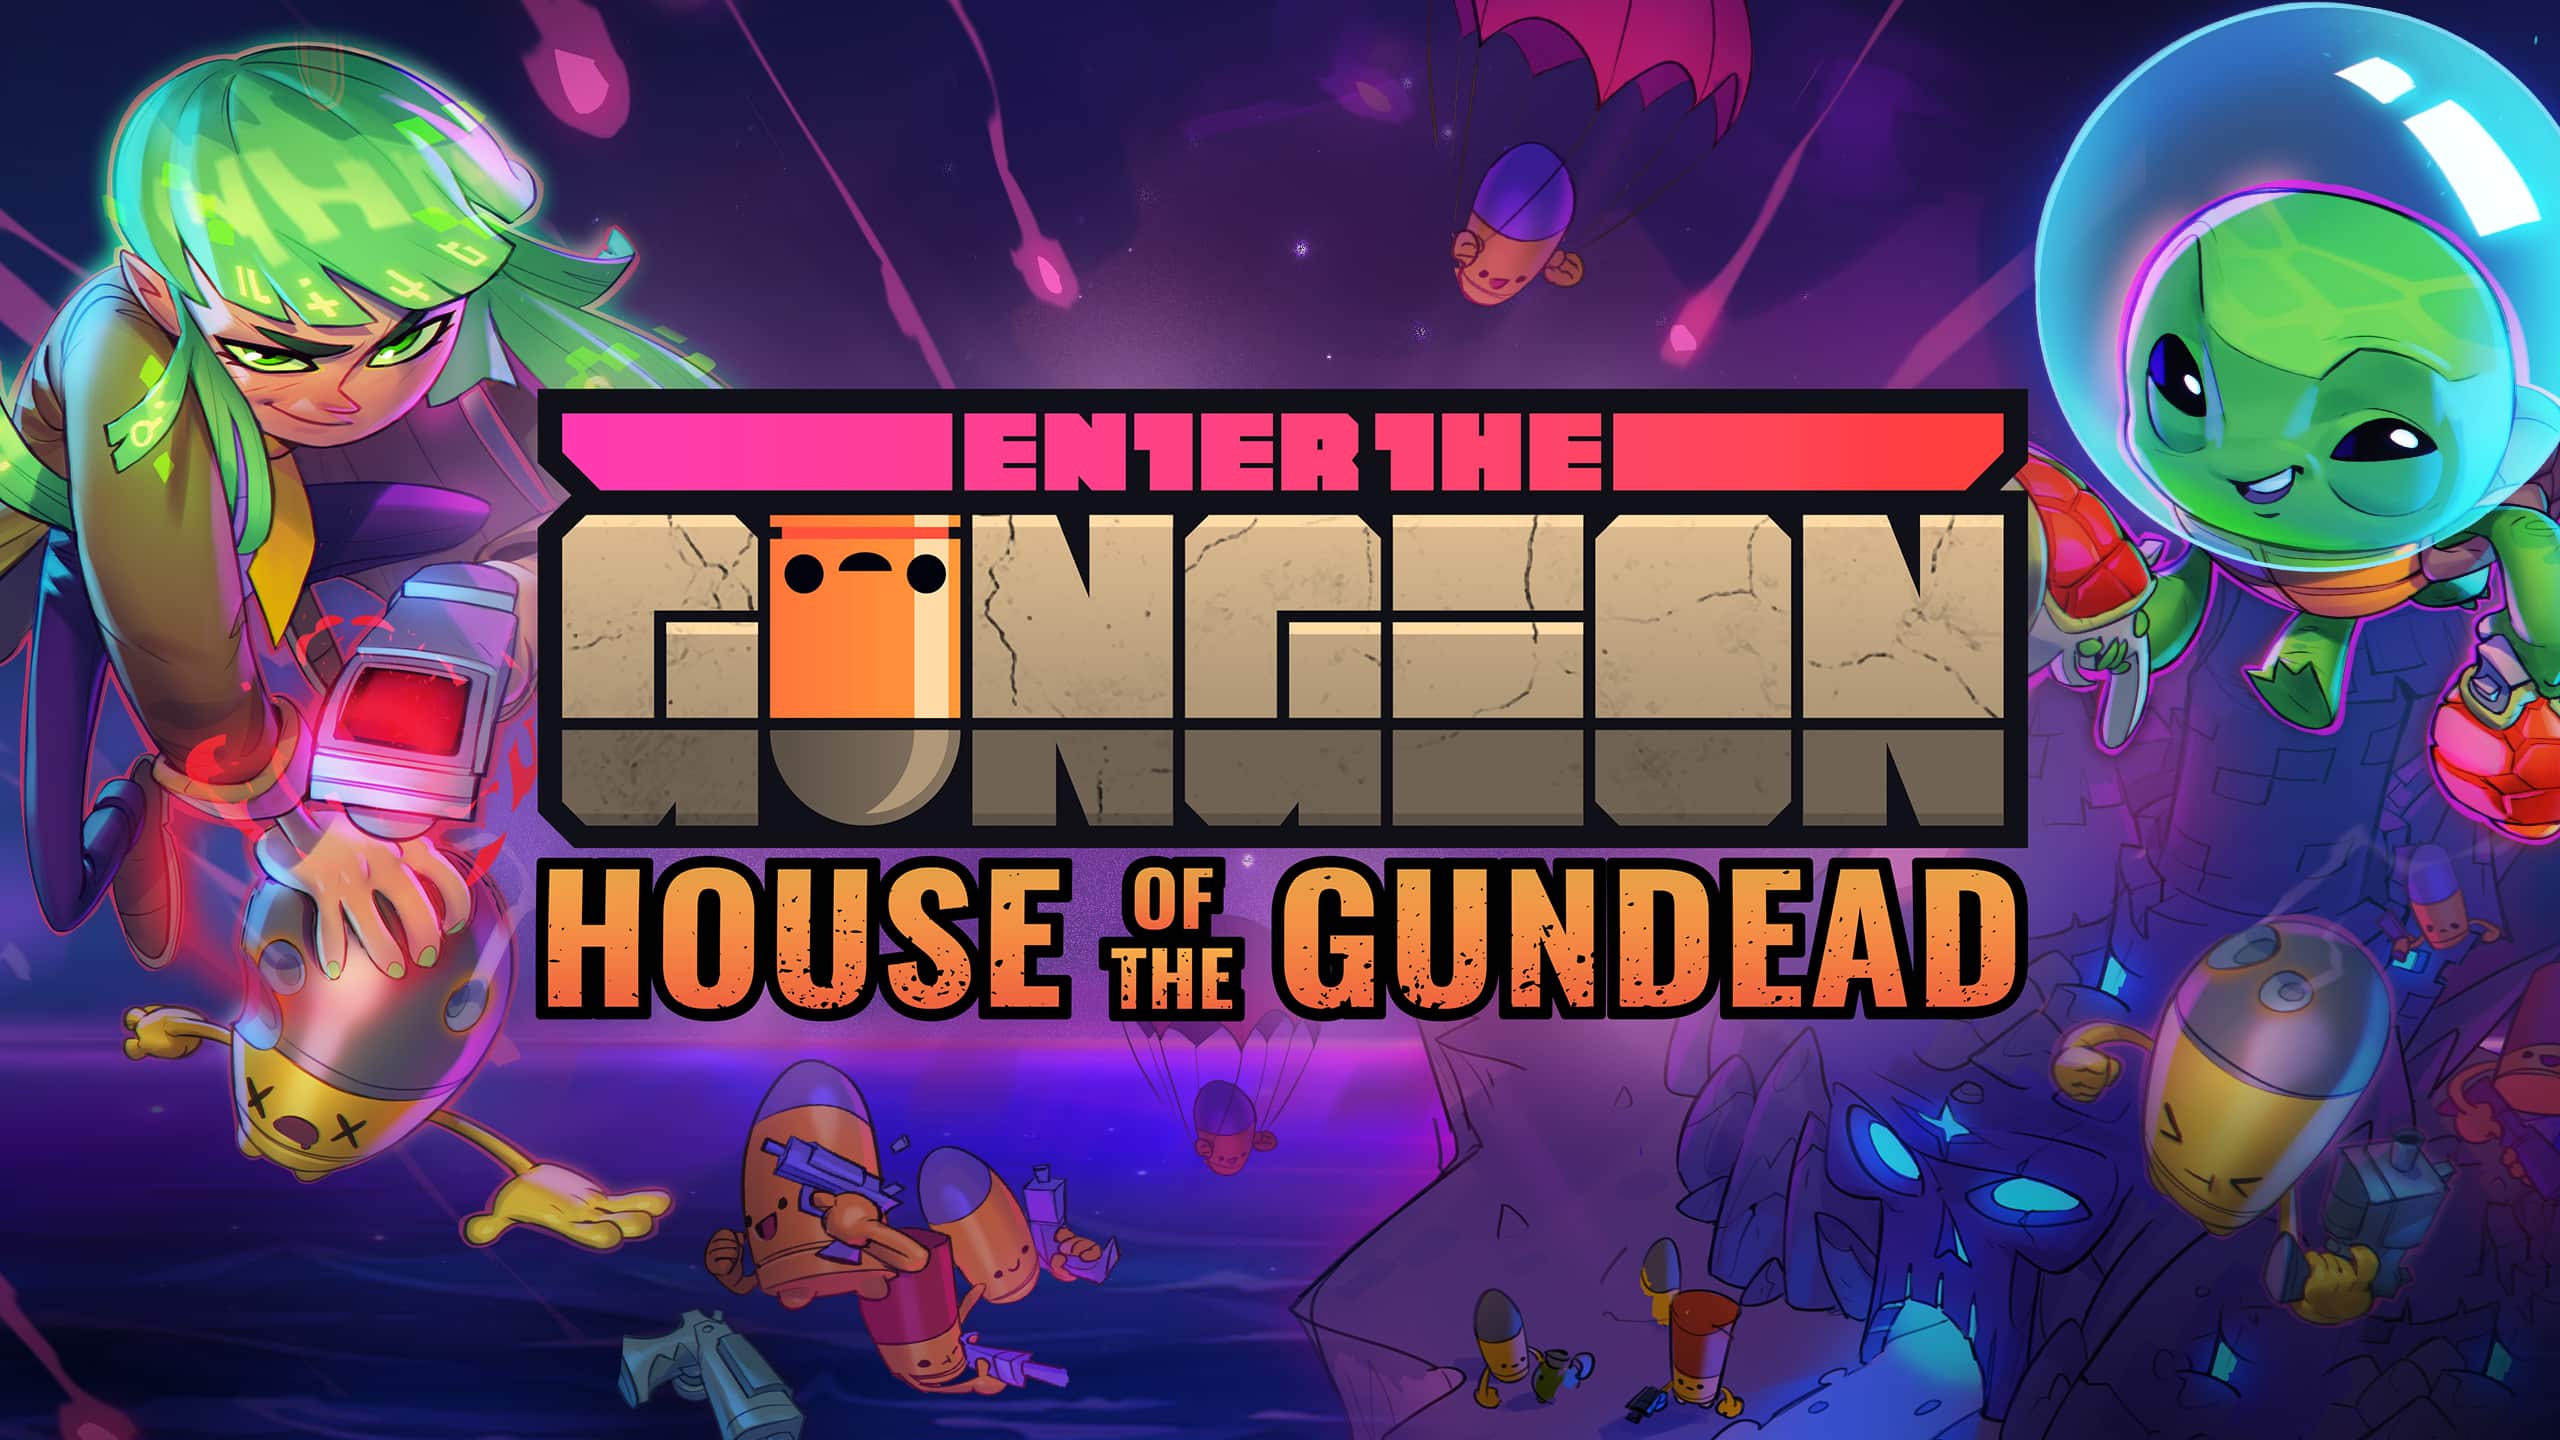 House of the Gundead Finally Available for Purchase; Arcades with the Machine Revealed 1